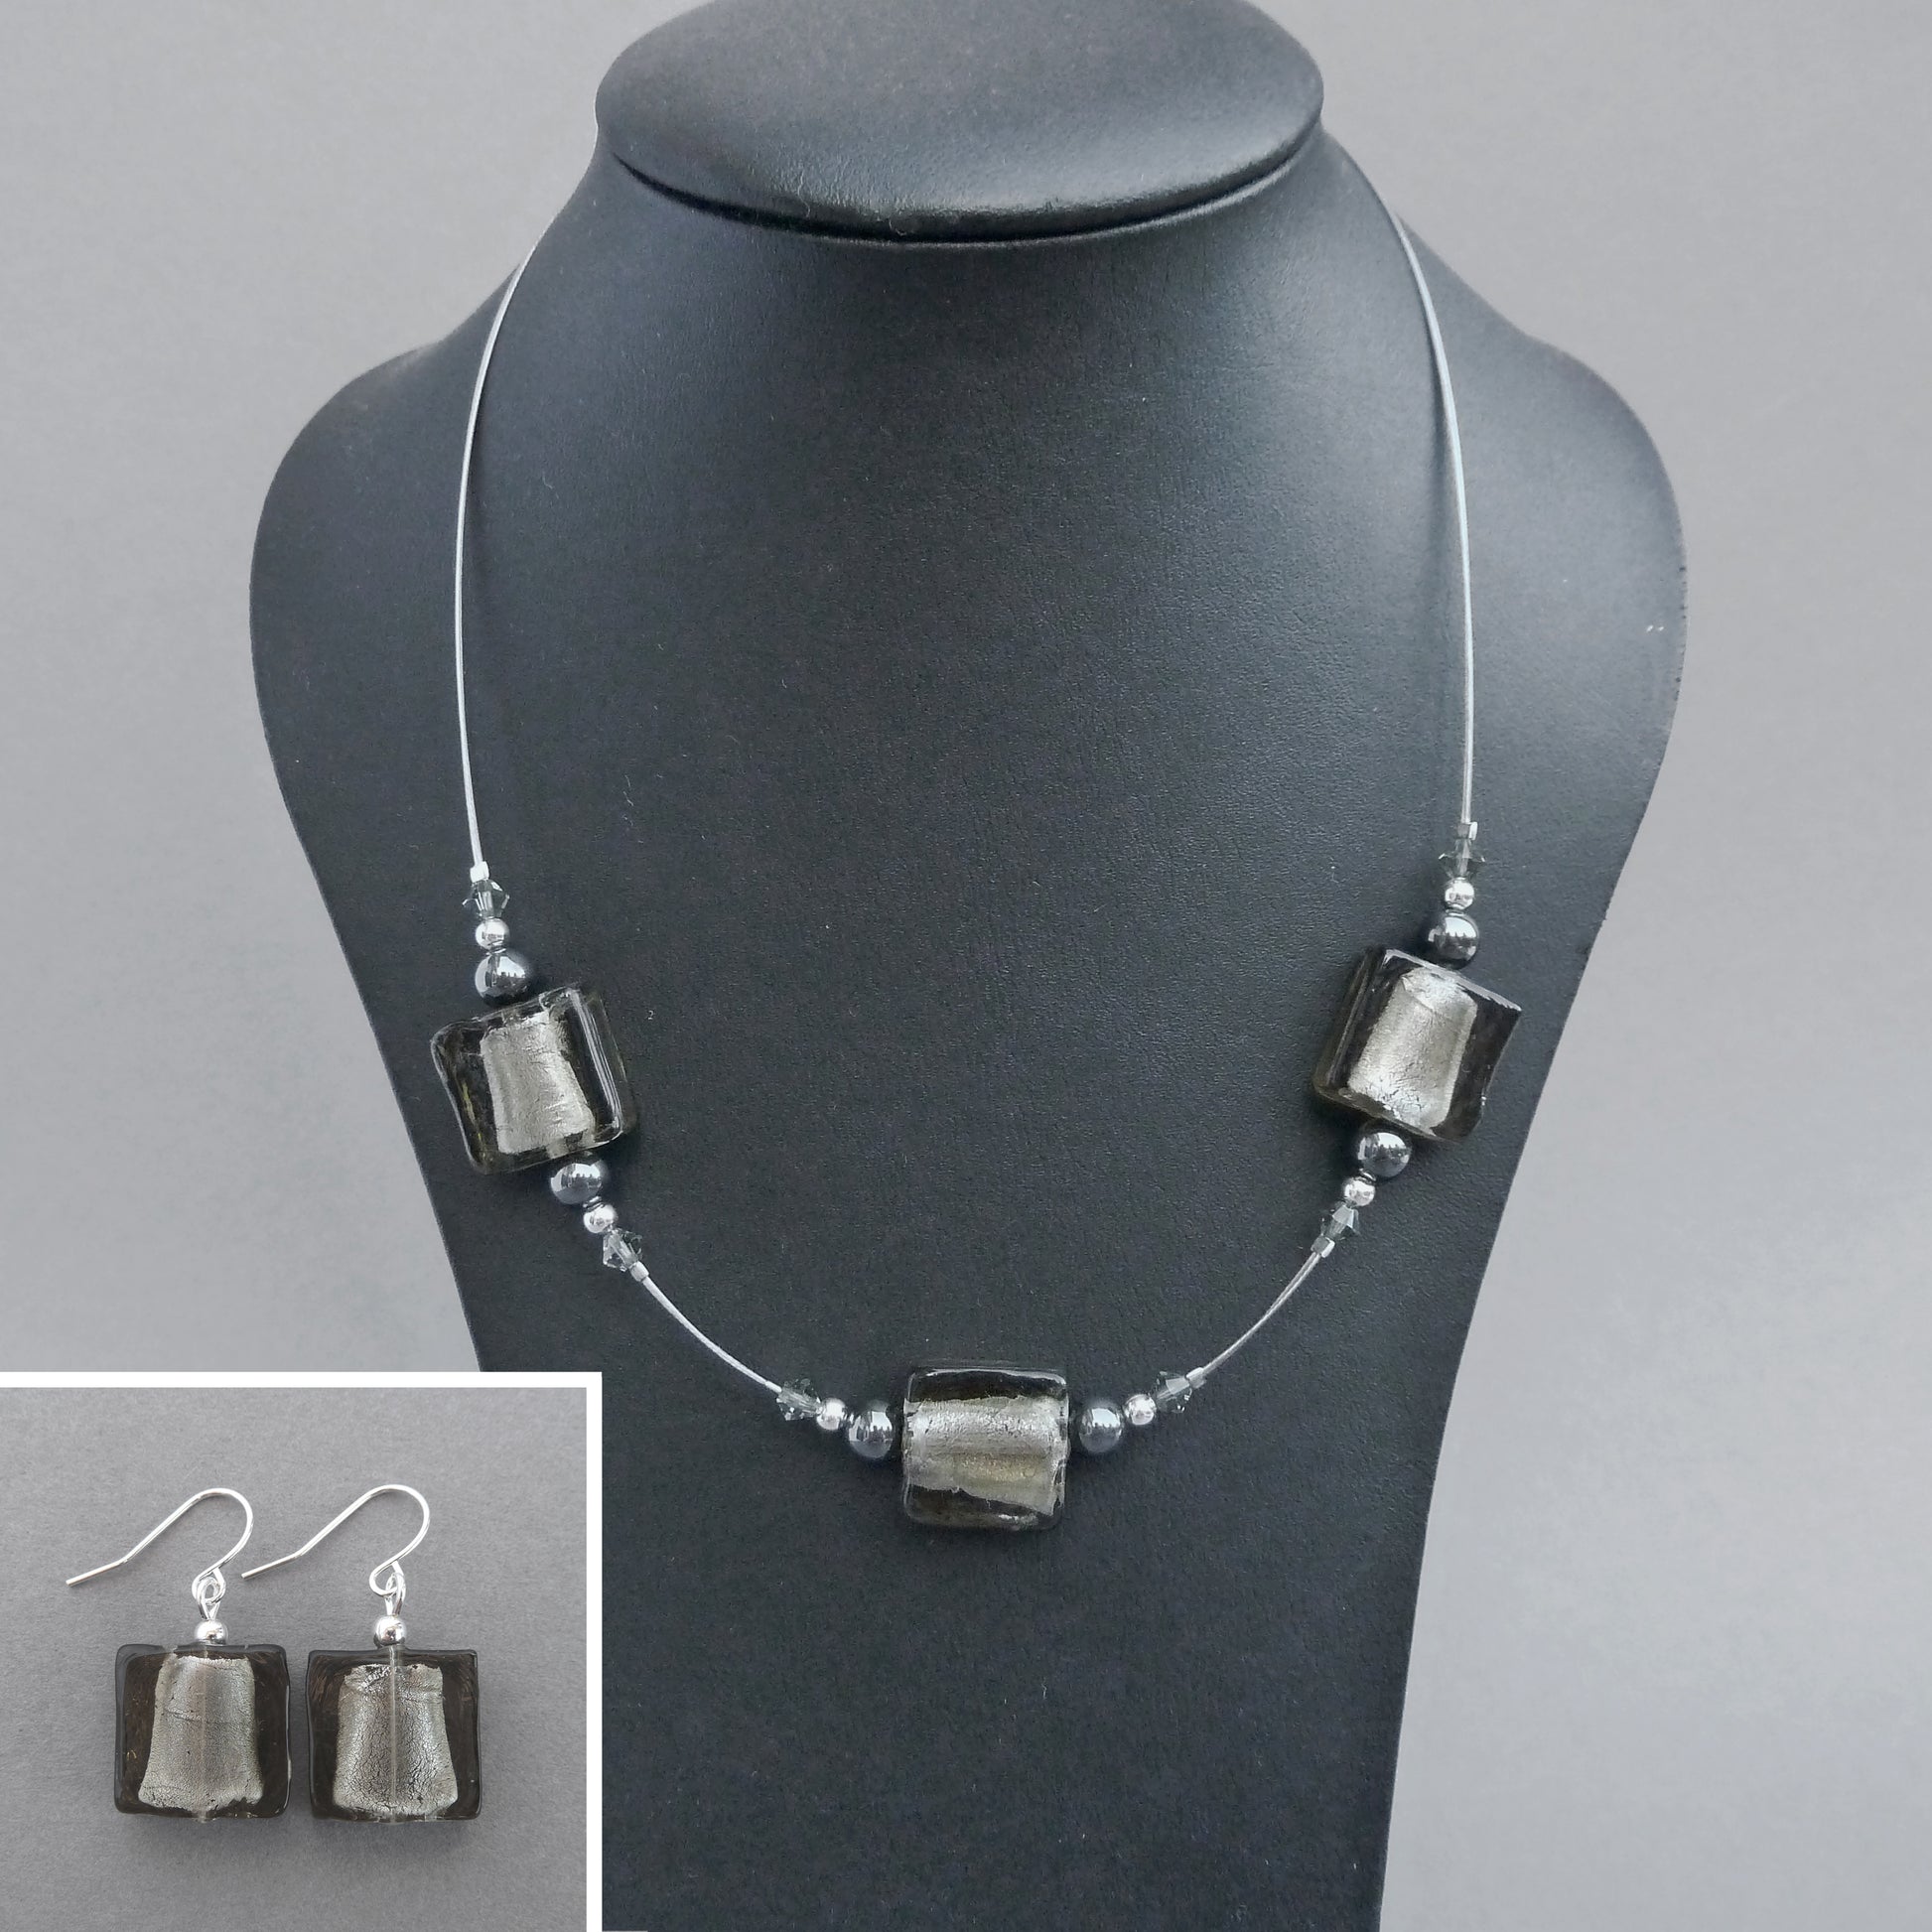 Grey fused glass necklace and earrings